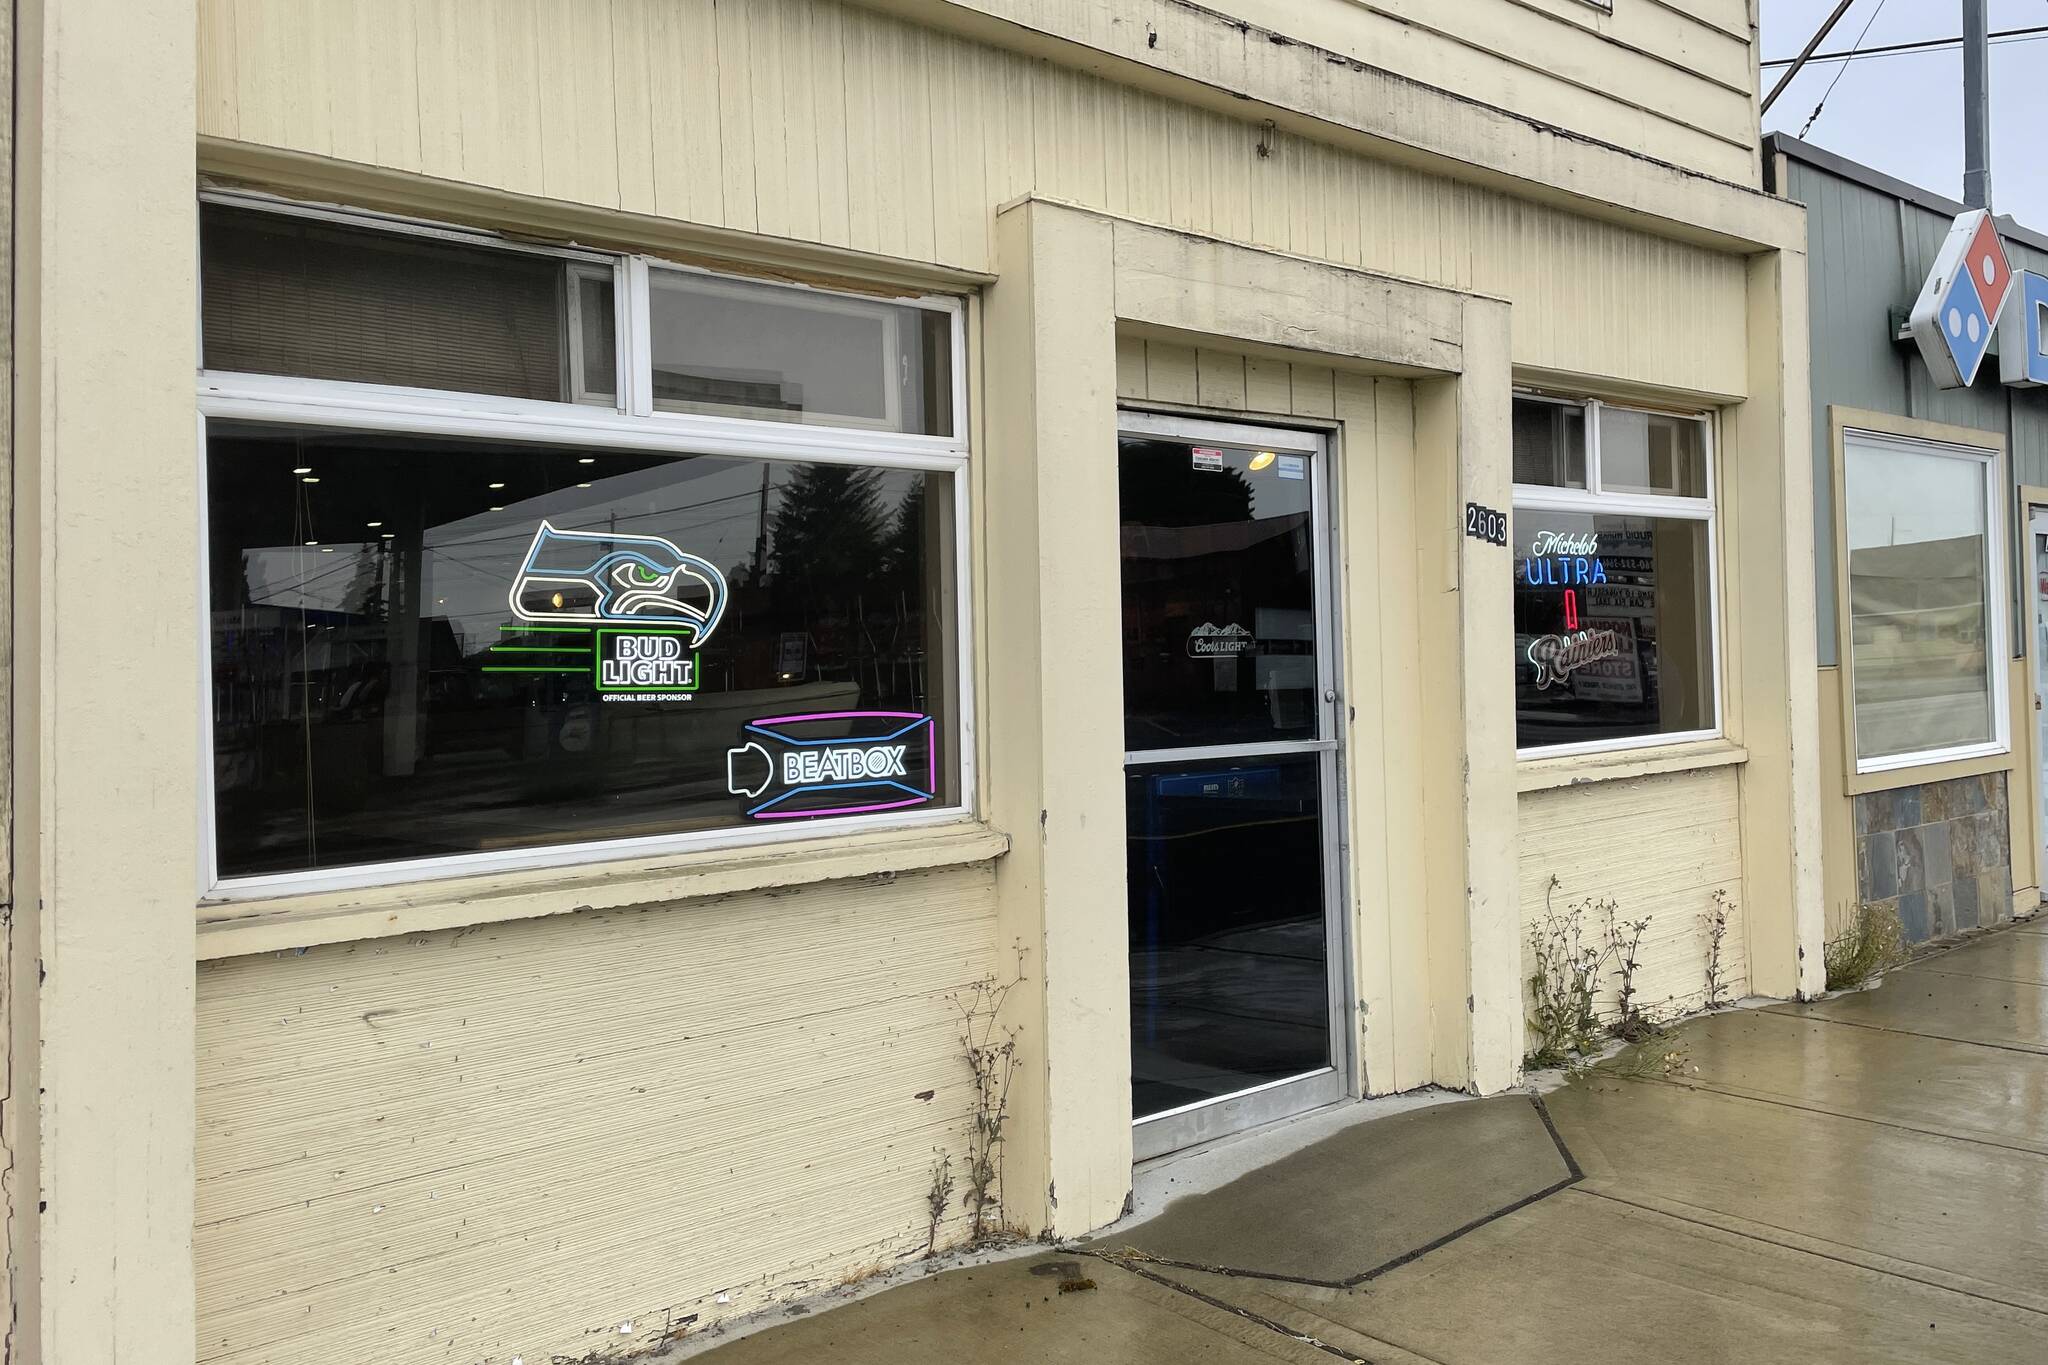 The Hoquiam Police Department is investigating a fatal shooting that occurred in the Ace of Clubs Tavern in Hoquiam on the evening of Thursday, Sept. 15, 2022, where a 58-year-old man was killed. (Michael S. Lockett | The Daily World)